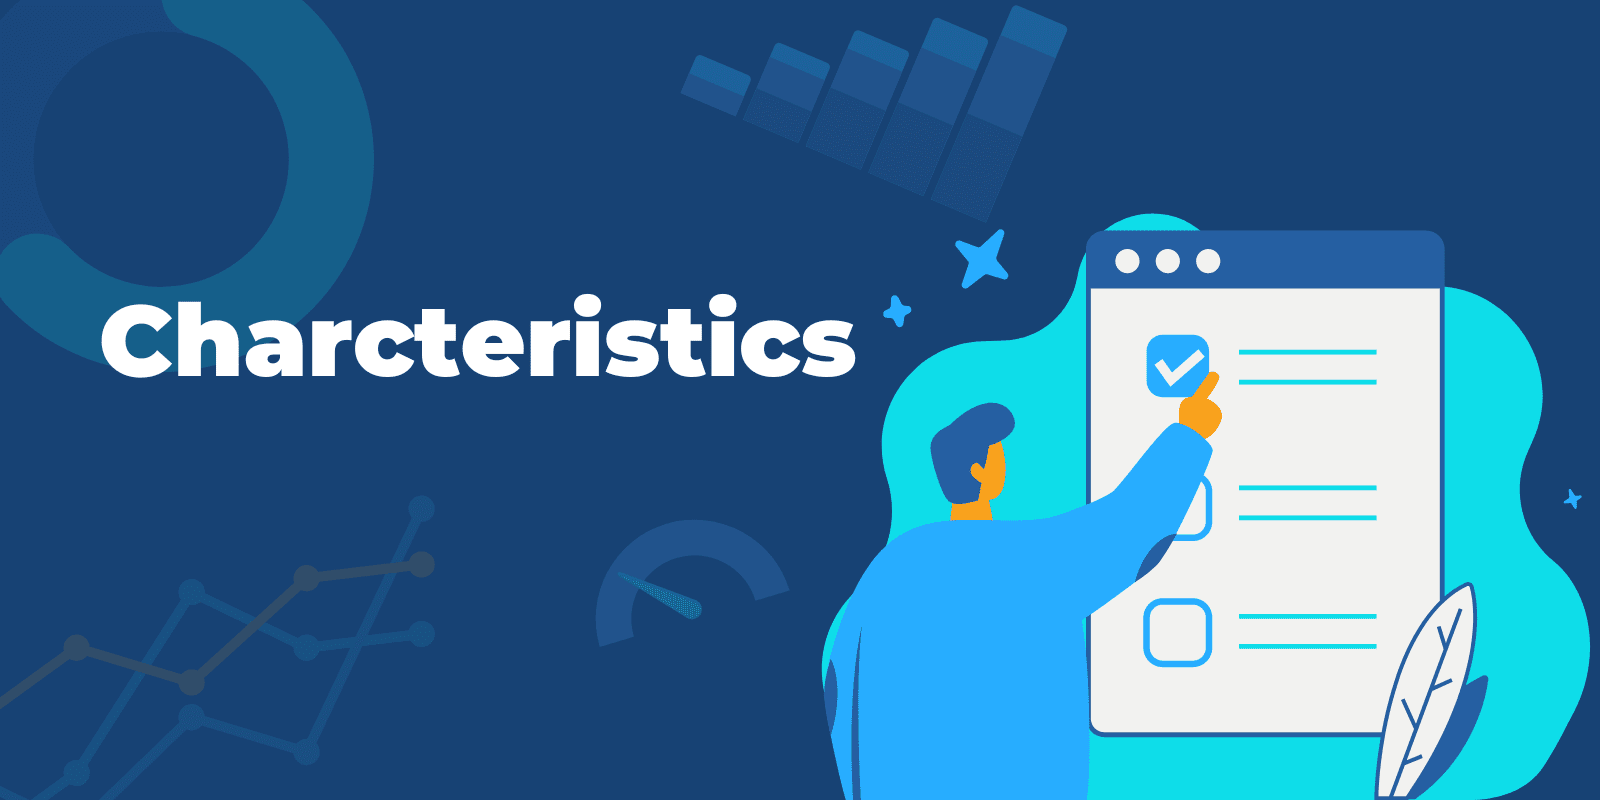 Characteristics represented with different graphs on the background and an illustration of a man pointing at a checklist